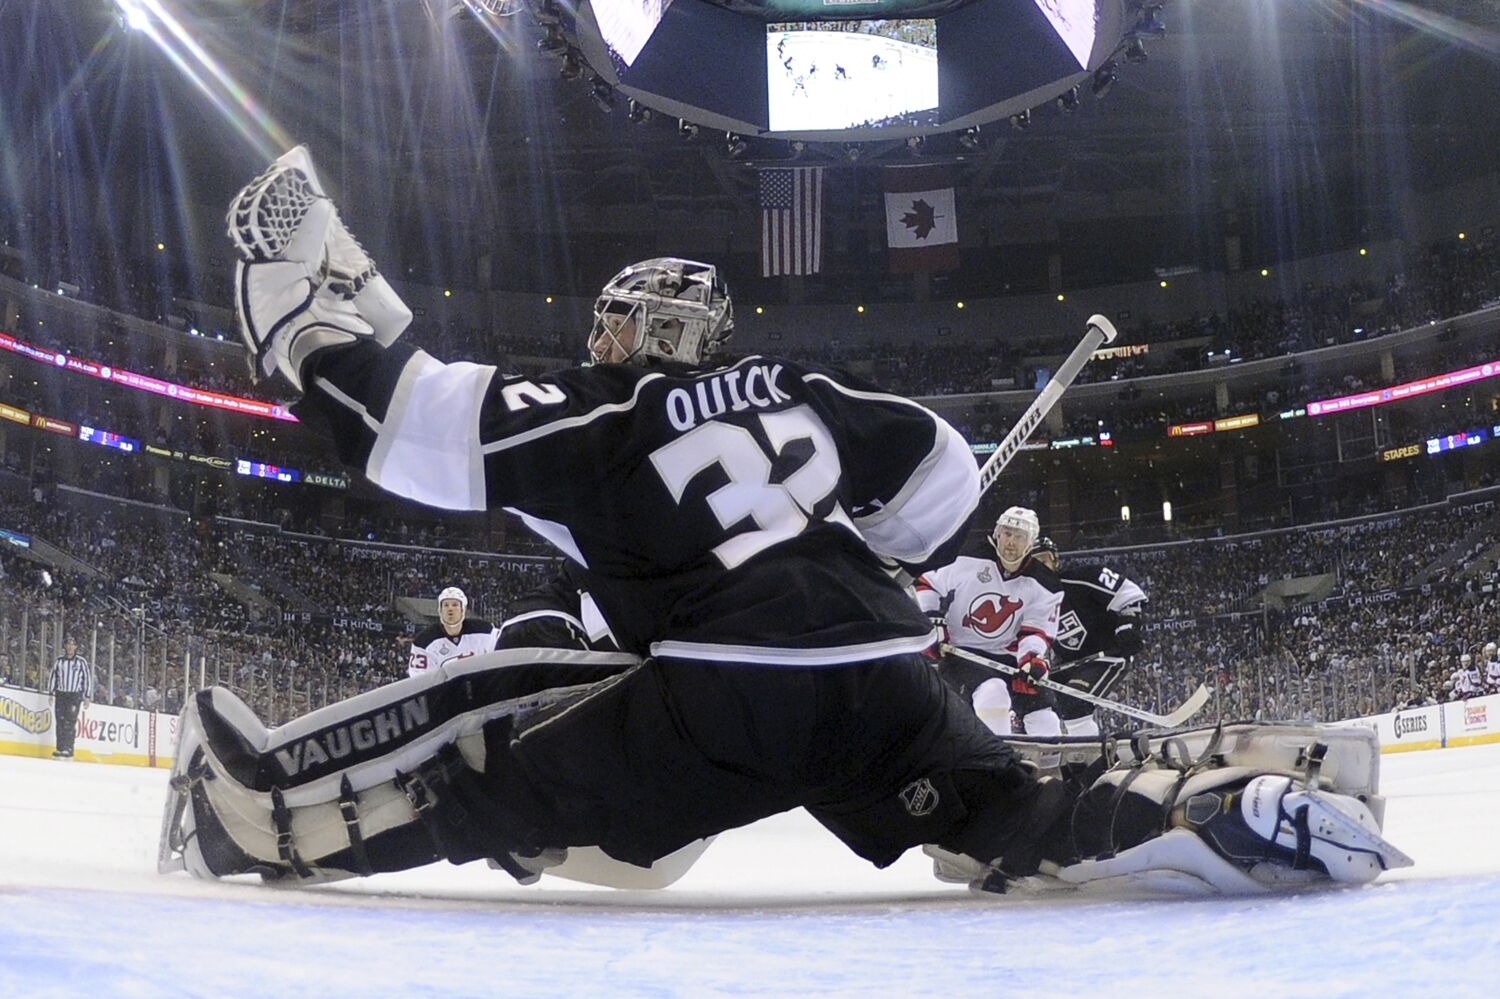 Jonathan Quick was the King who transformed Stanley Cup dreams into reality